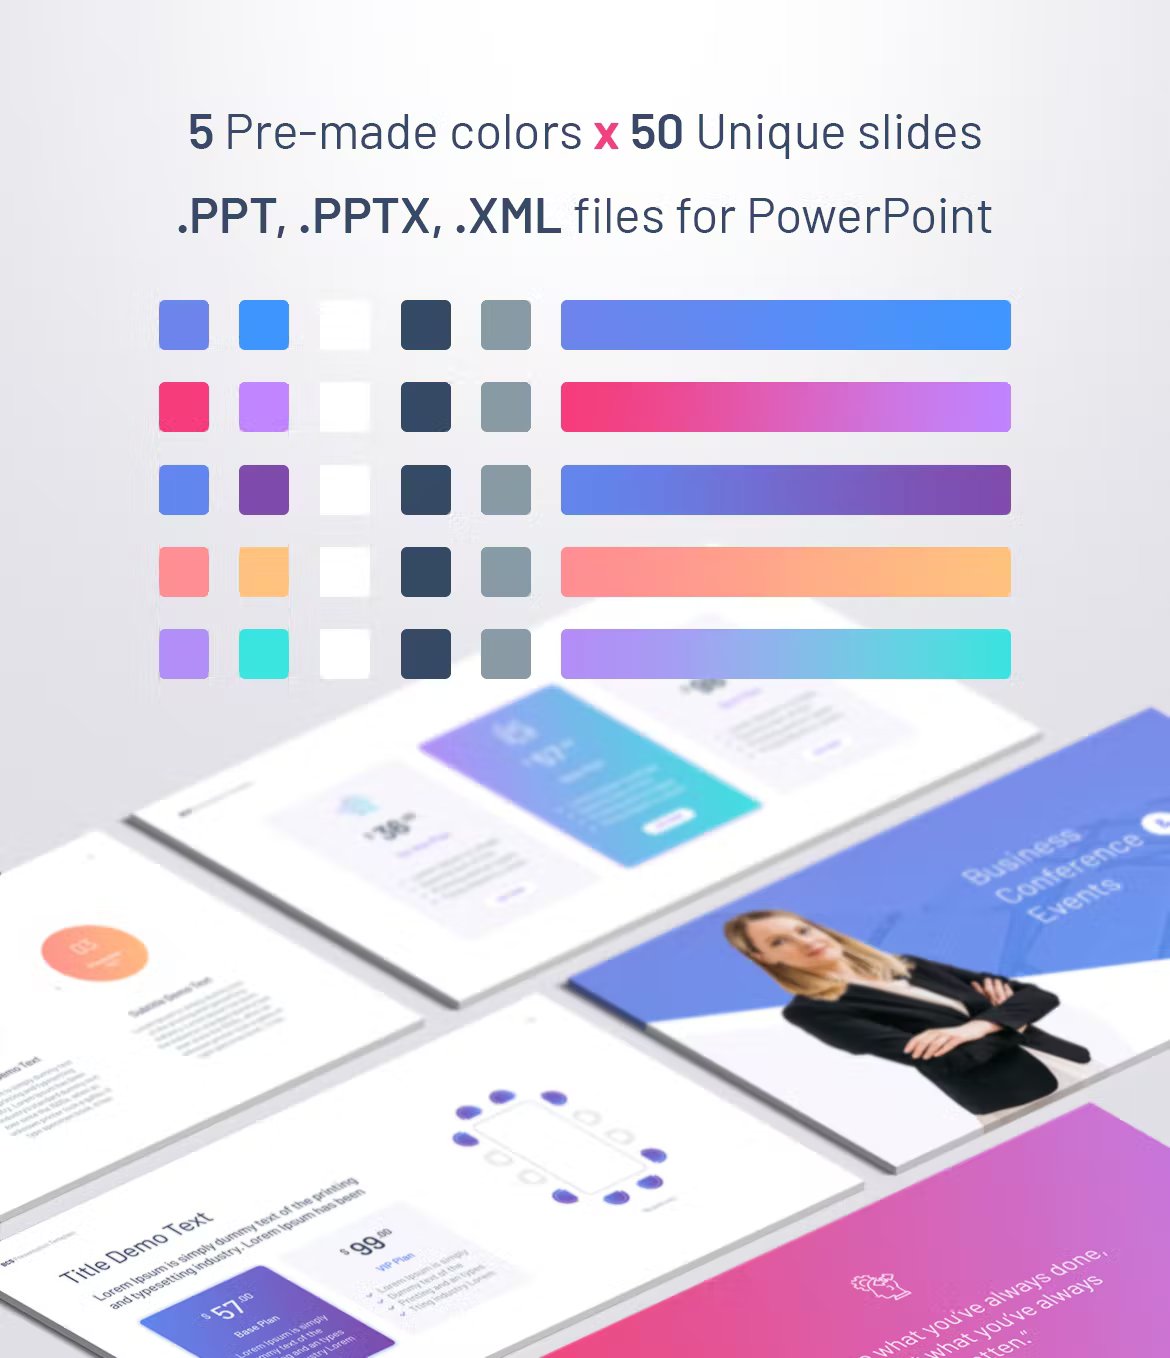 Color rates in the presentation.